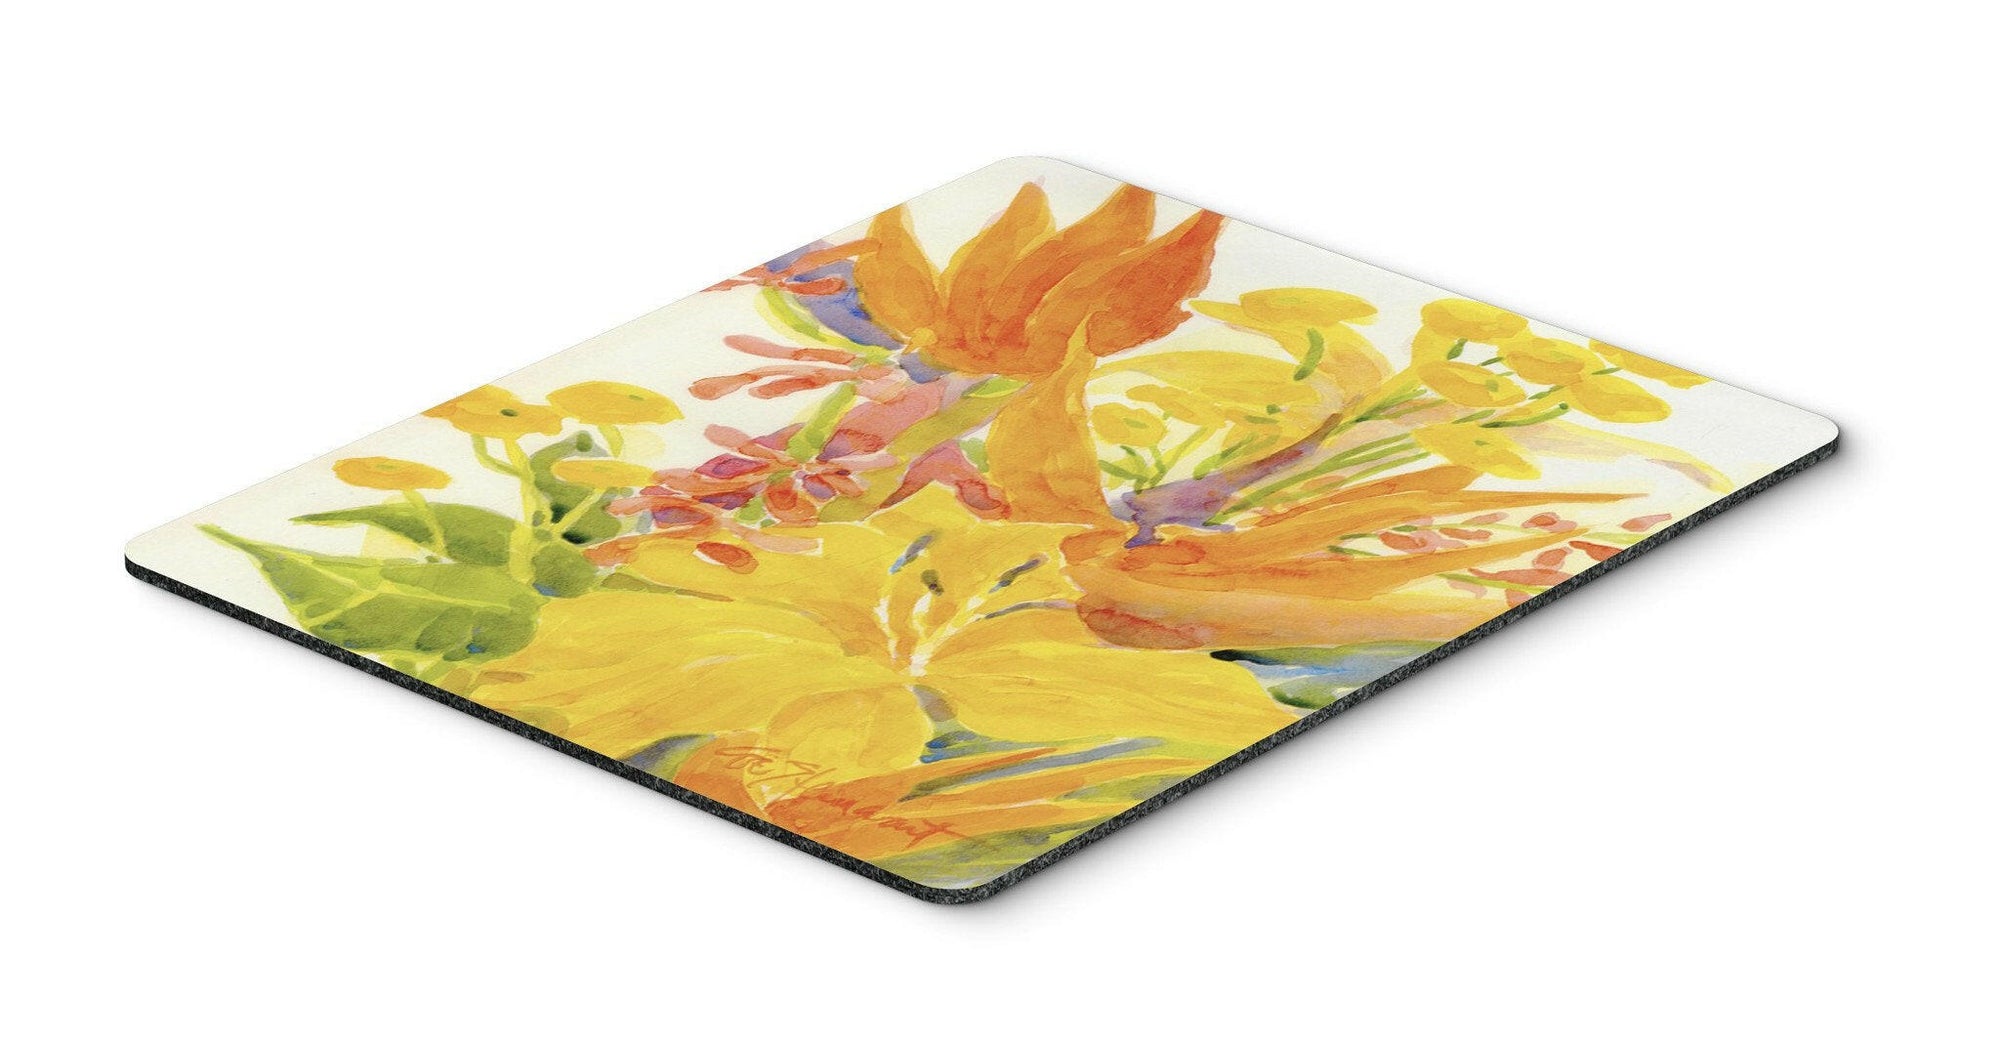 Flower - Bird of Paradise and Hibiscus  Mouse Pad, Hot Pad or Trivet by Caroline's Treasures